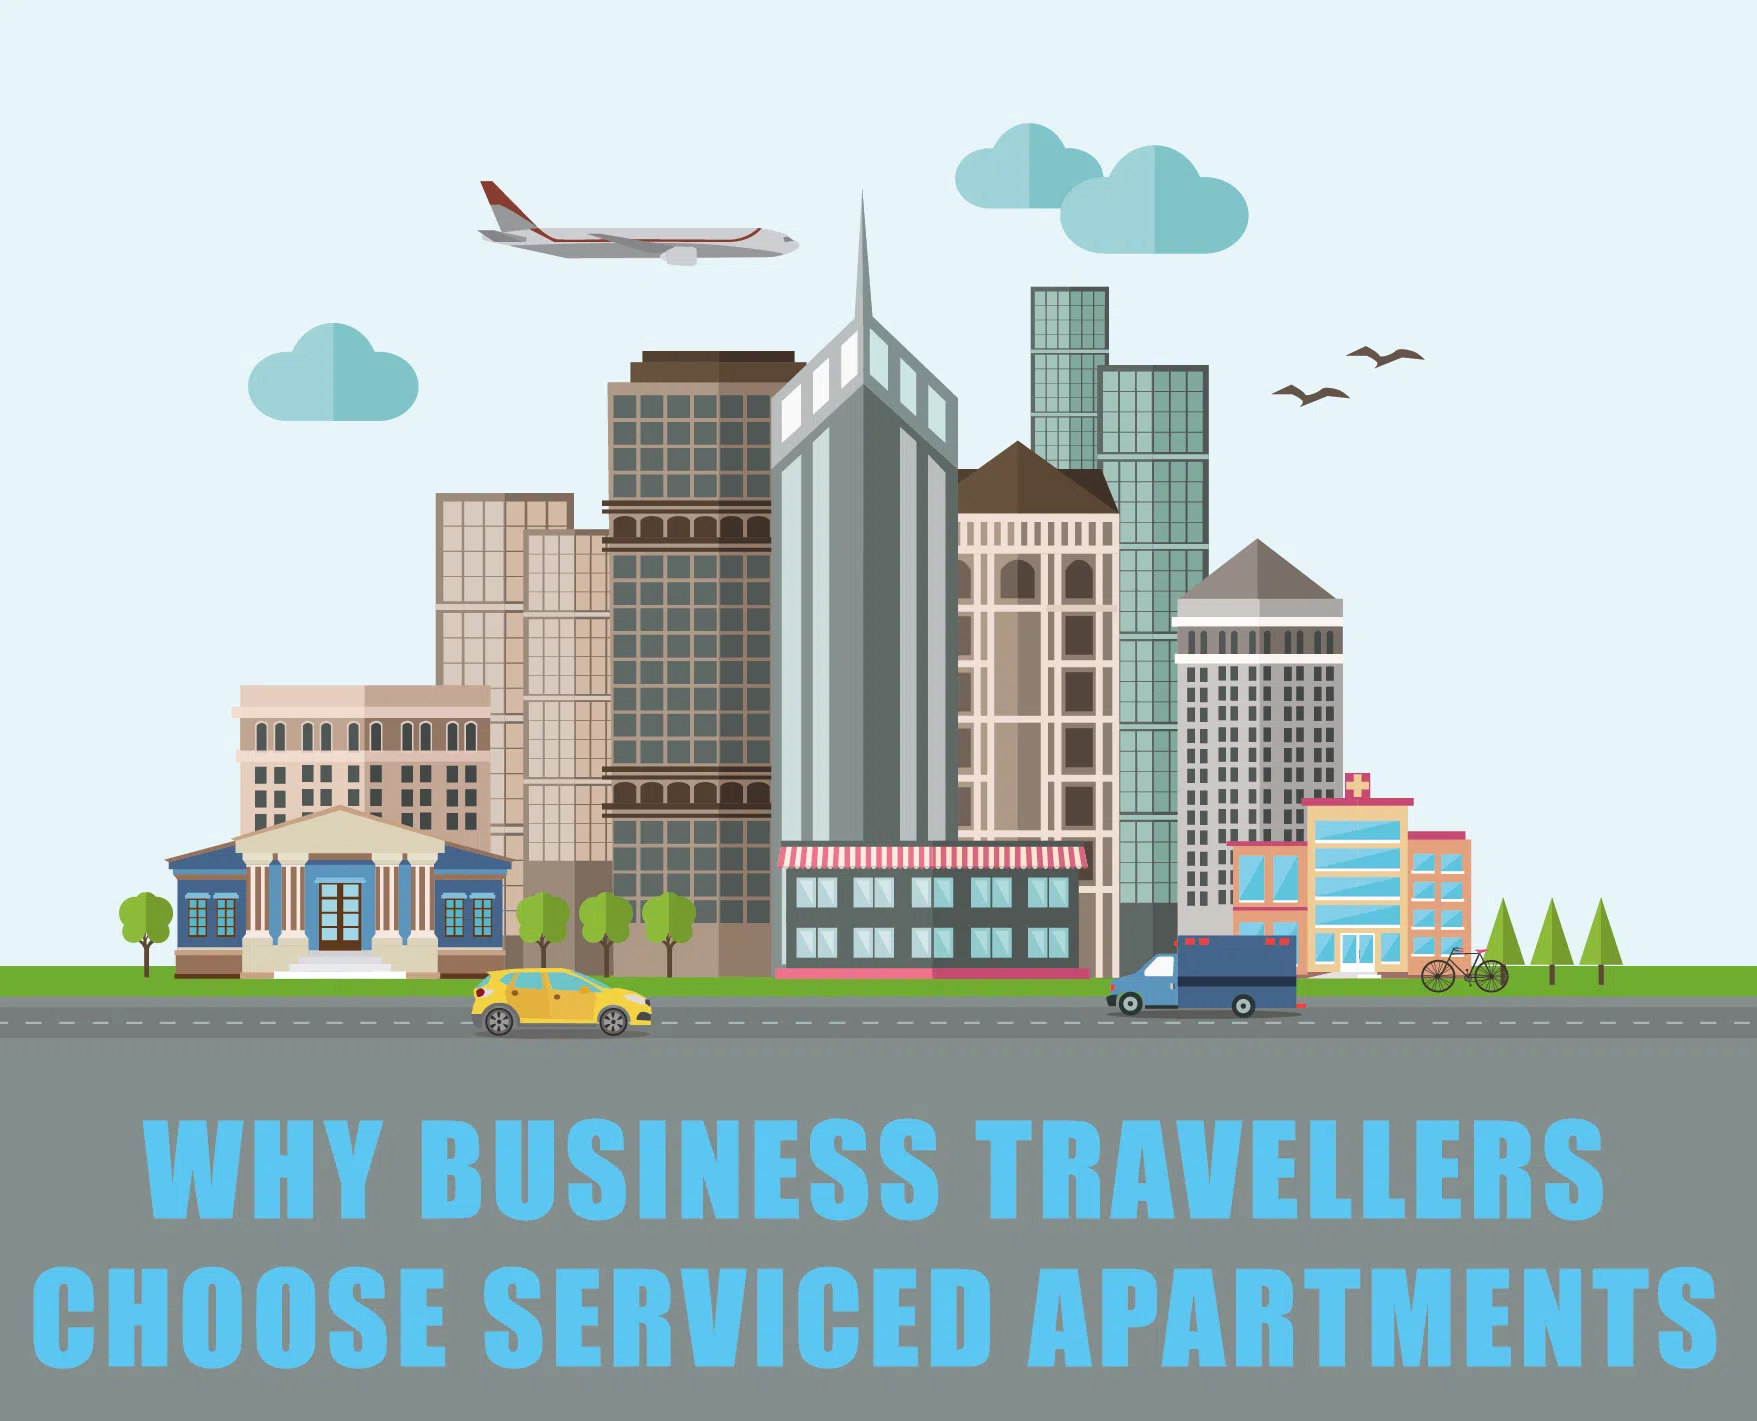 Benefits of Serviced Apartments for Business Travelers - Infographic